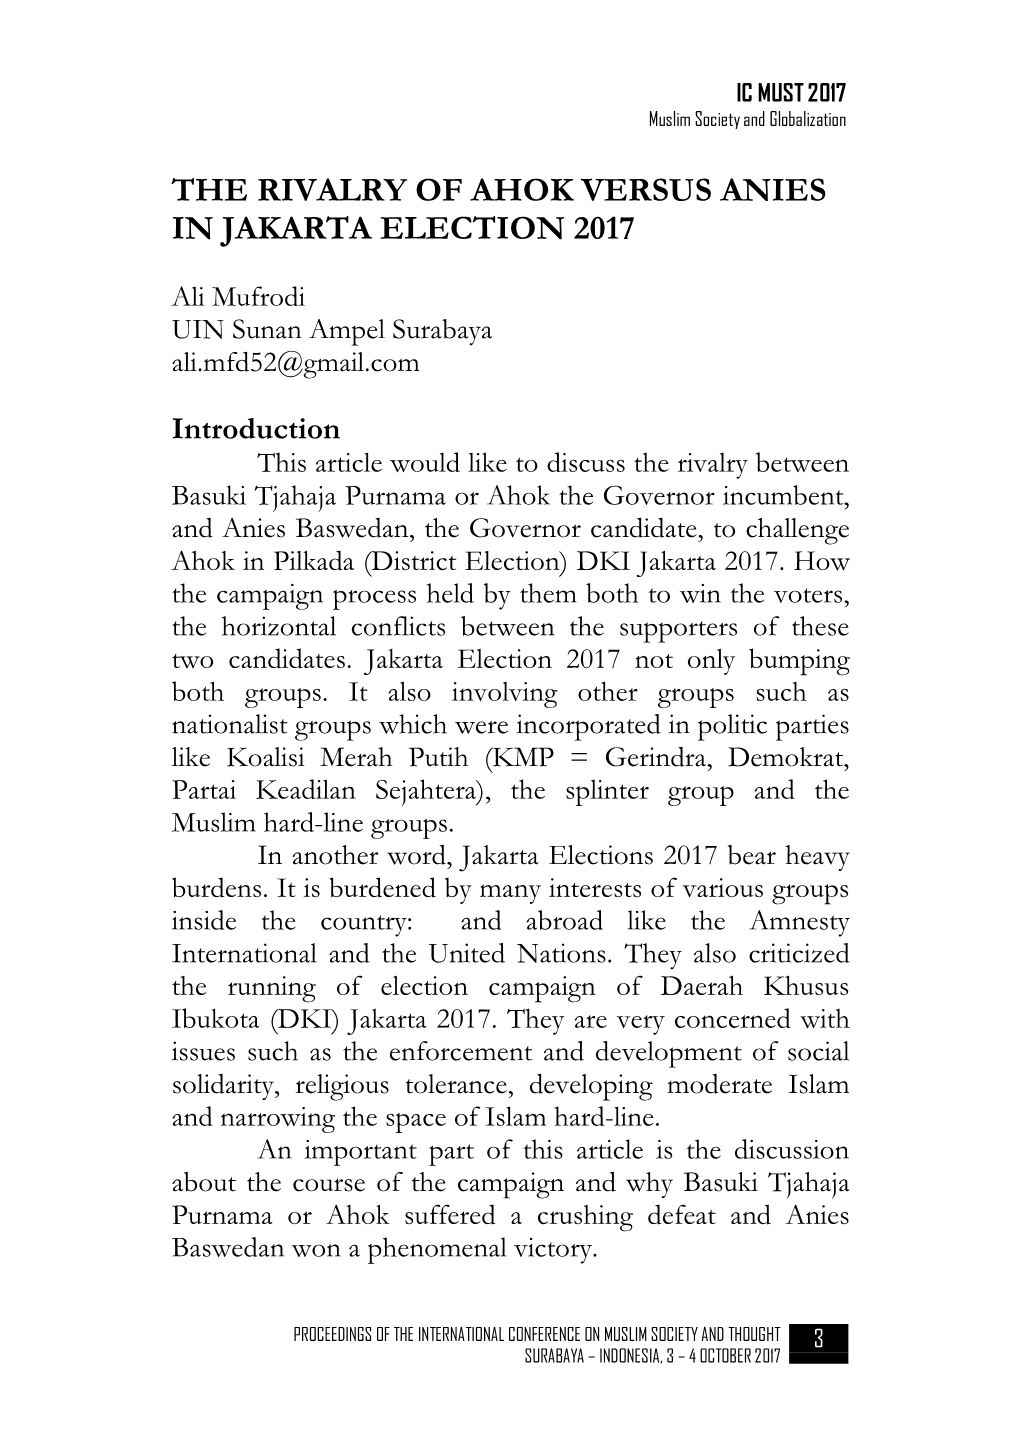 The Rivalry of Ahok Versus Anies in Jakarta Election 2017